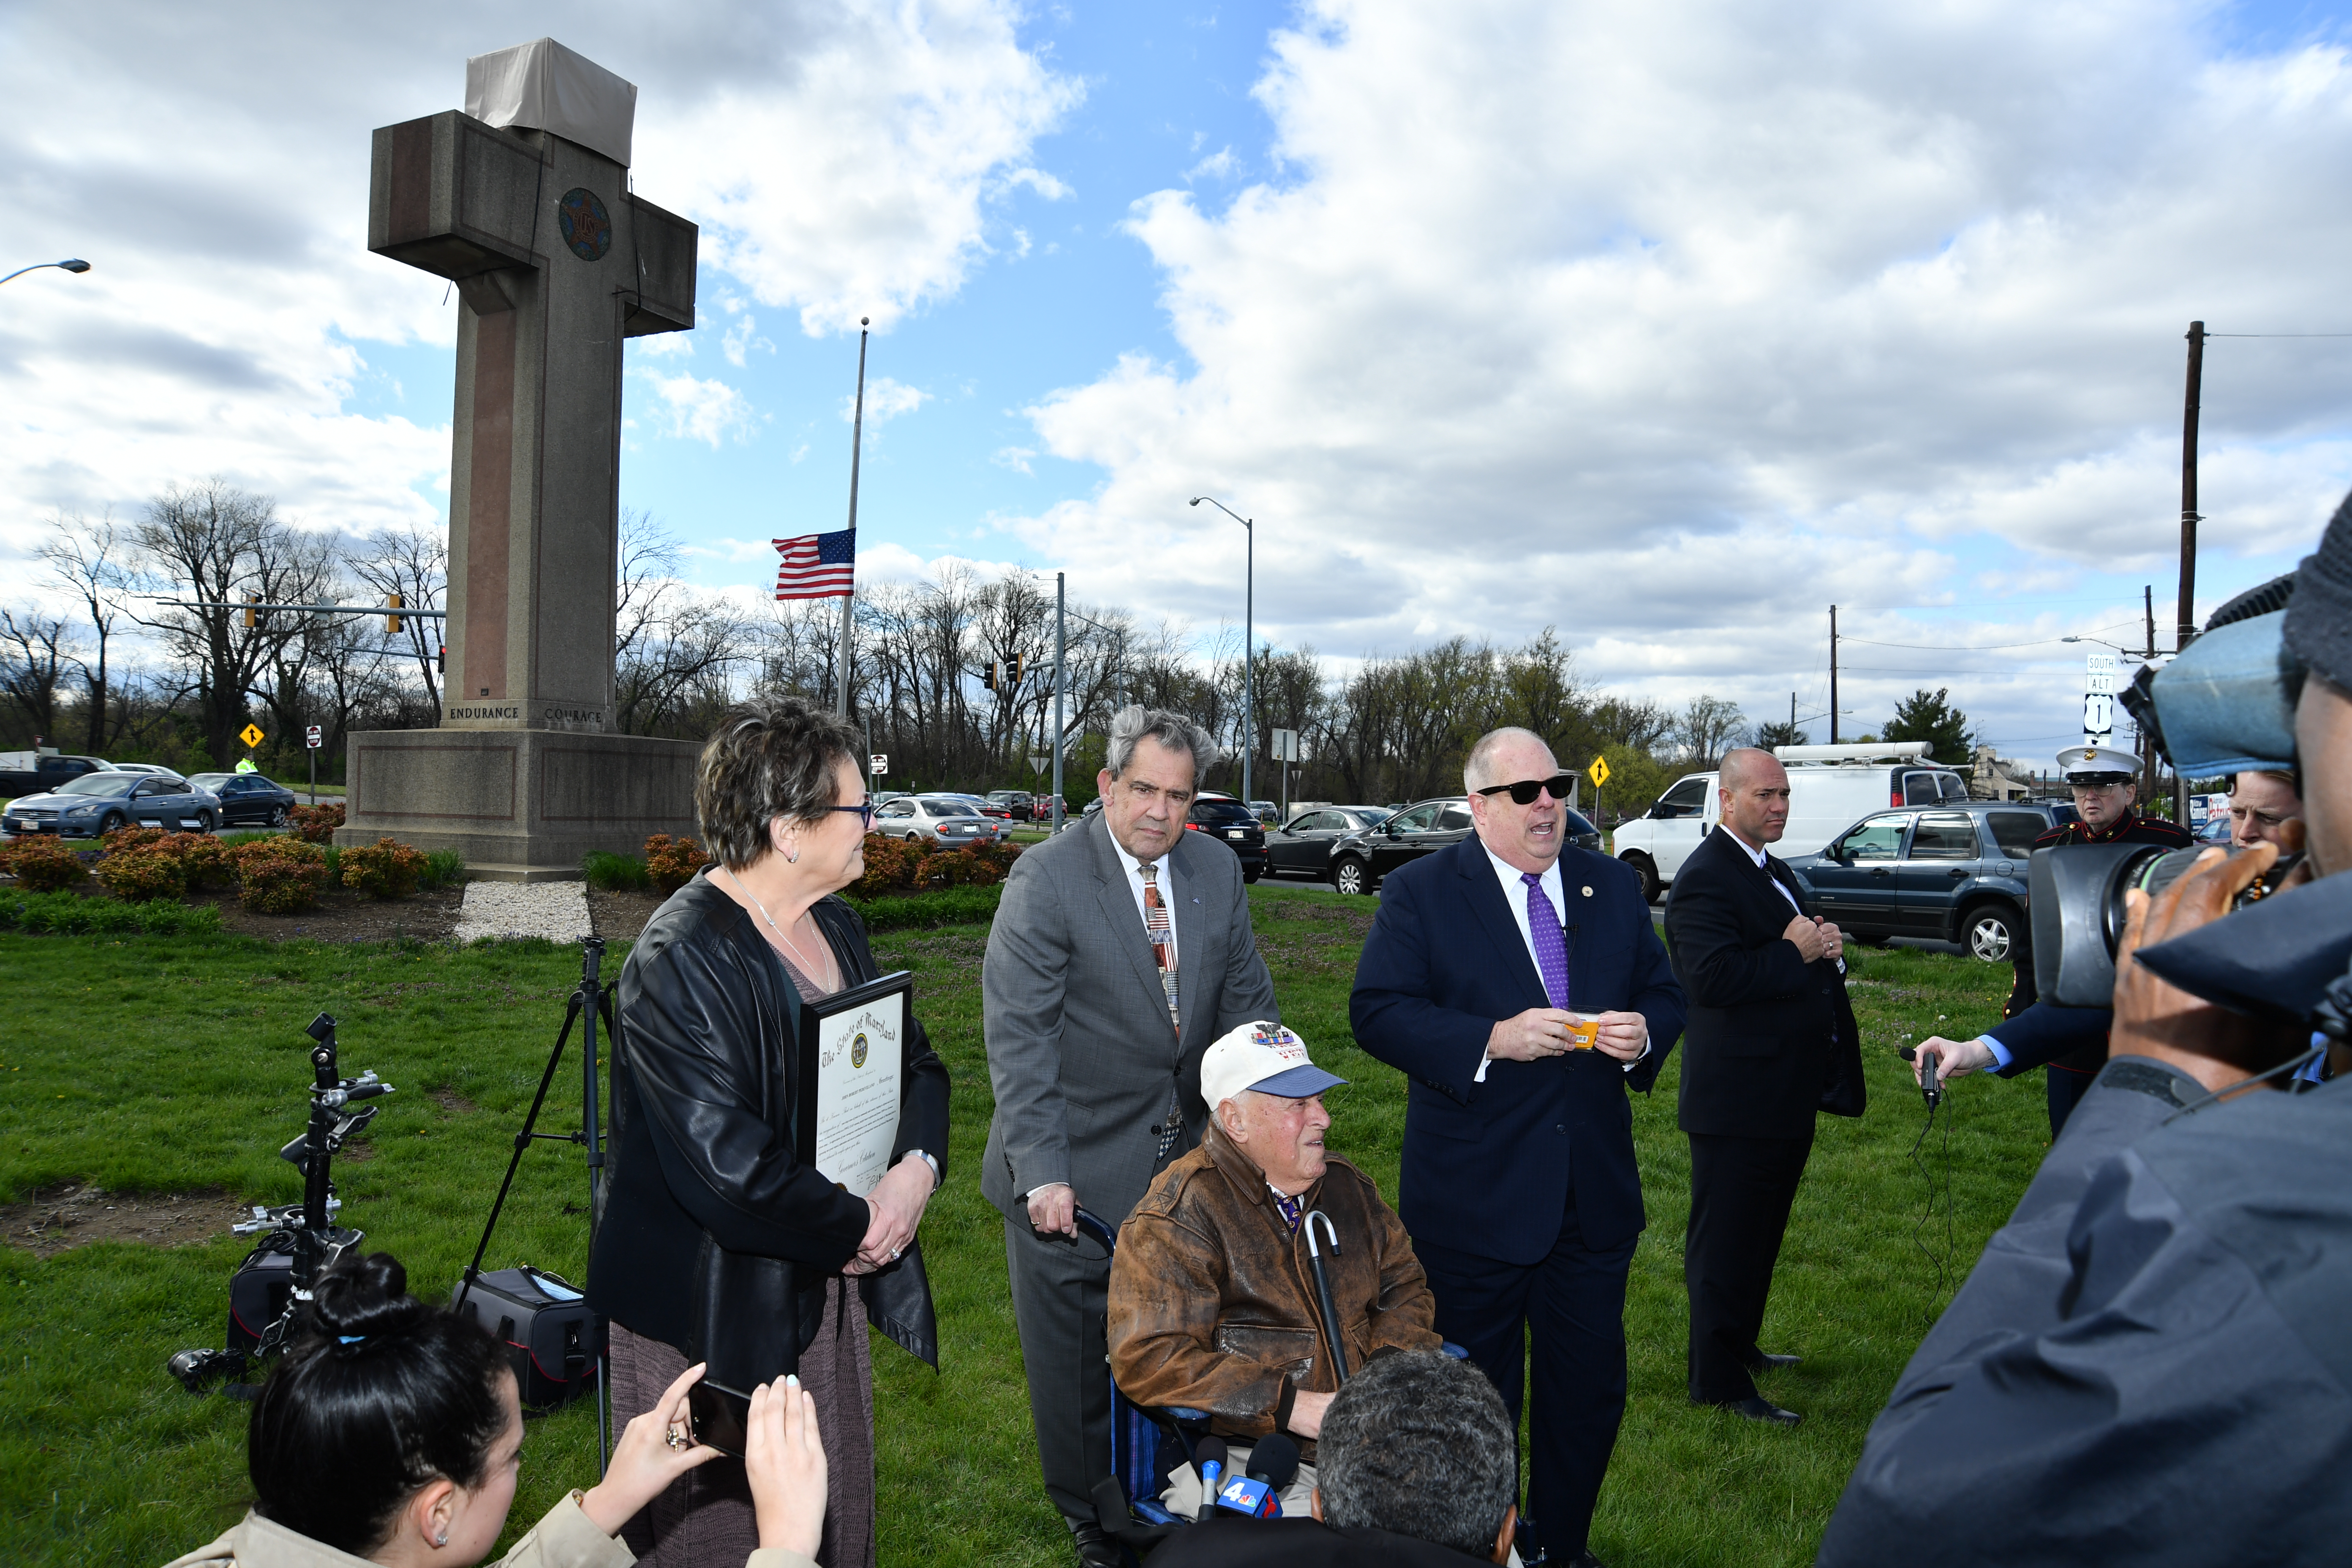 Maryland Gov. Larry Hogan visits the Bladensburg Peace Cross in April 2018. (Maryland GovPics/accessed via Flickr creative commons)